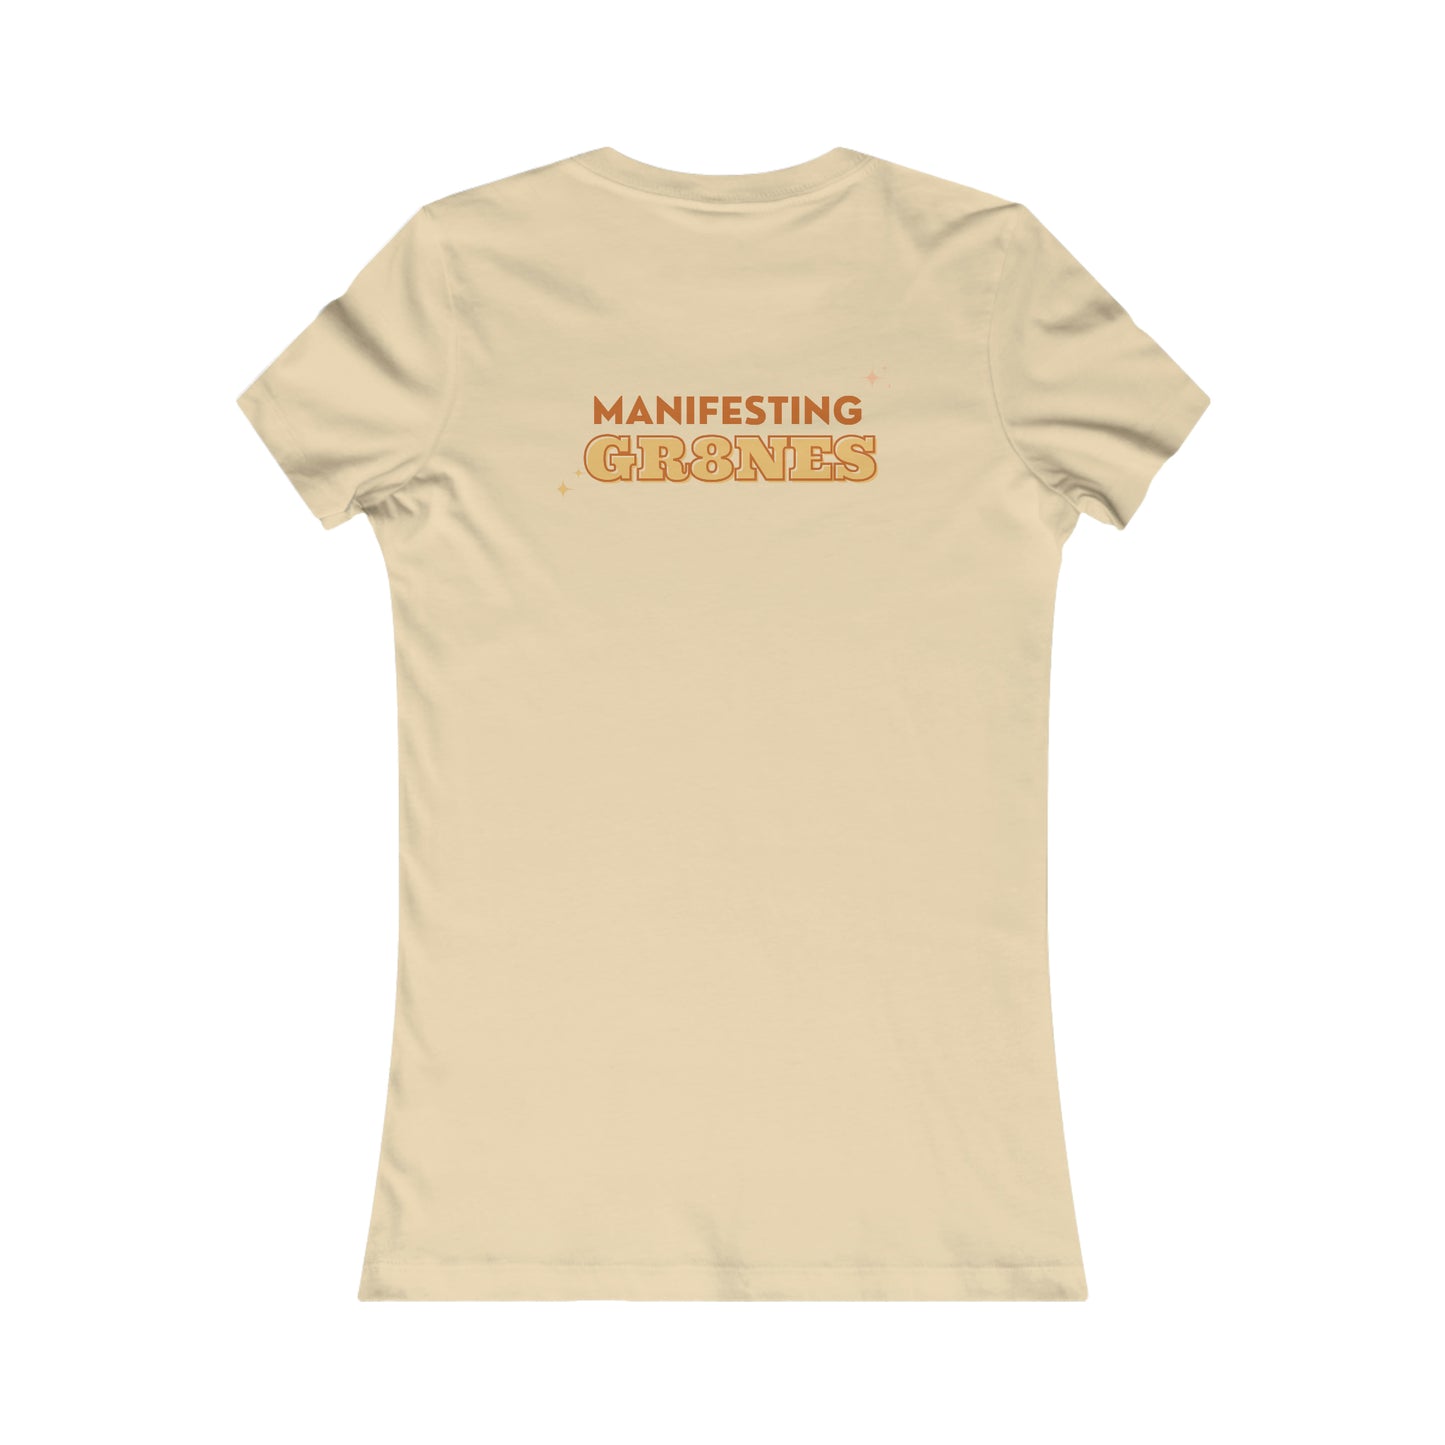 Manifesting Greatness "GR8NES" T Shirt two-sided design